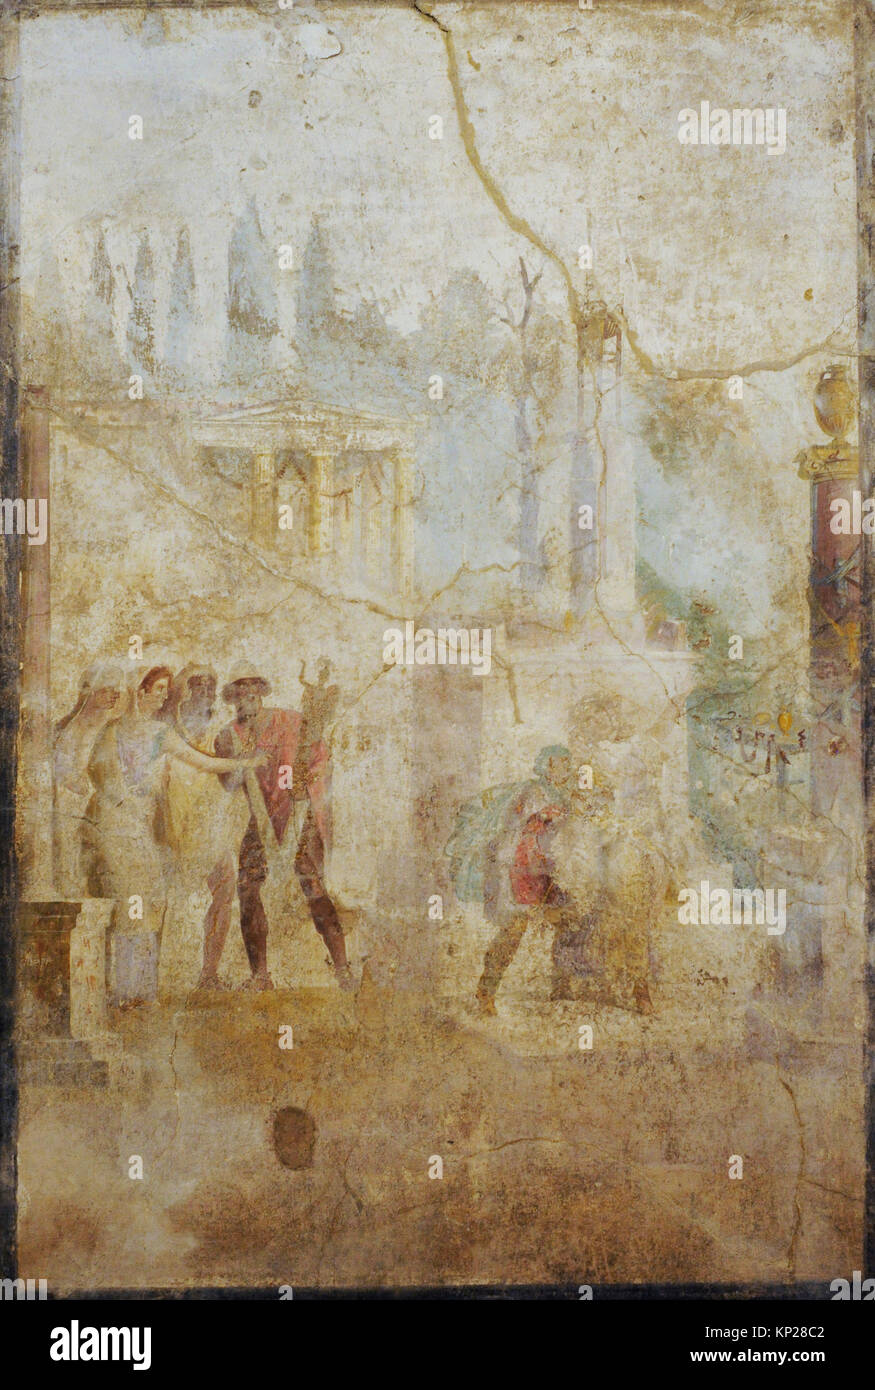 Roman fresco depicting Ulysses carrying the Palladium (statue of Athena) that he has stolen from the temple. 1st century AD. Triclinium. House of the Actors or the Mimes. Pompeii. National Archaeological Museum. Naples. Italy. Stock Photo